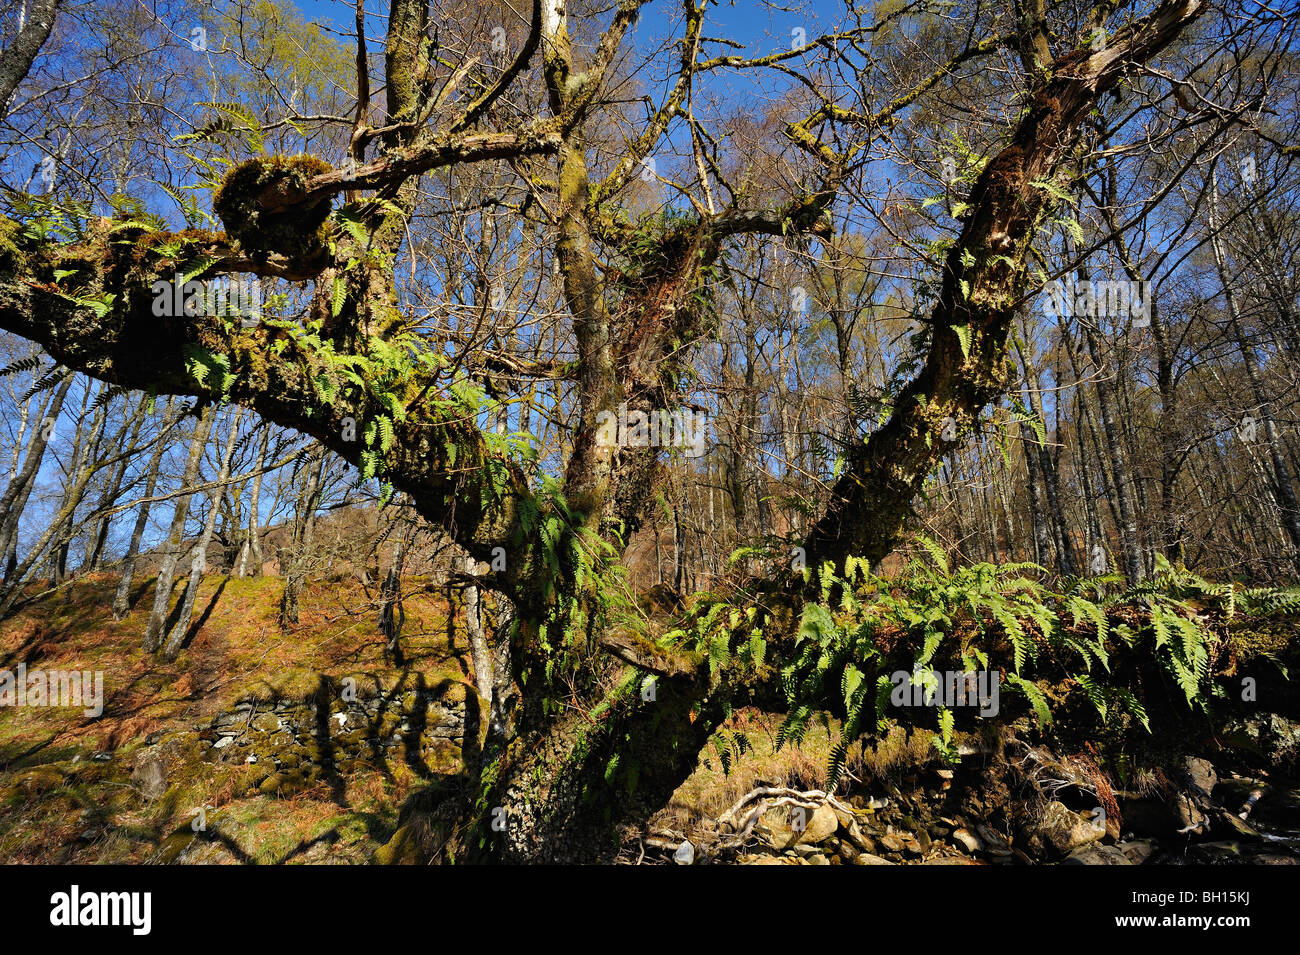 Parasitic ferns growing on the branches of a dead and decaying tree in woods near Killin, Perthshire, Scotland Stock Photo